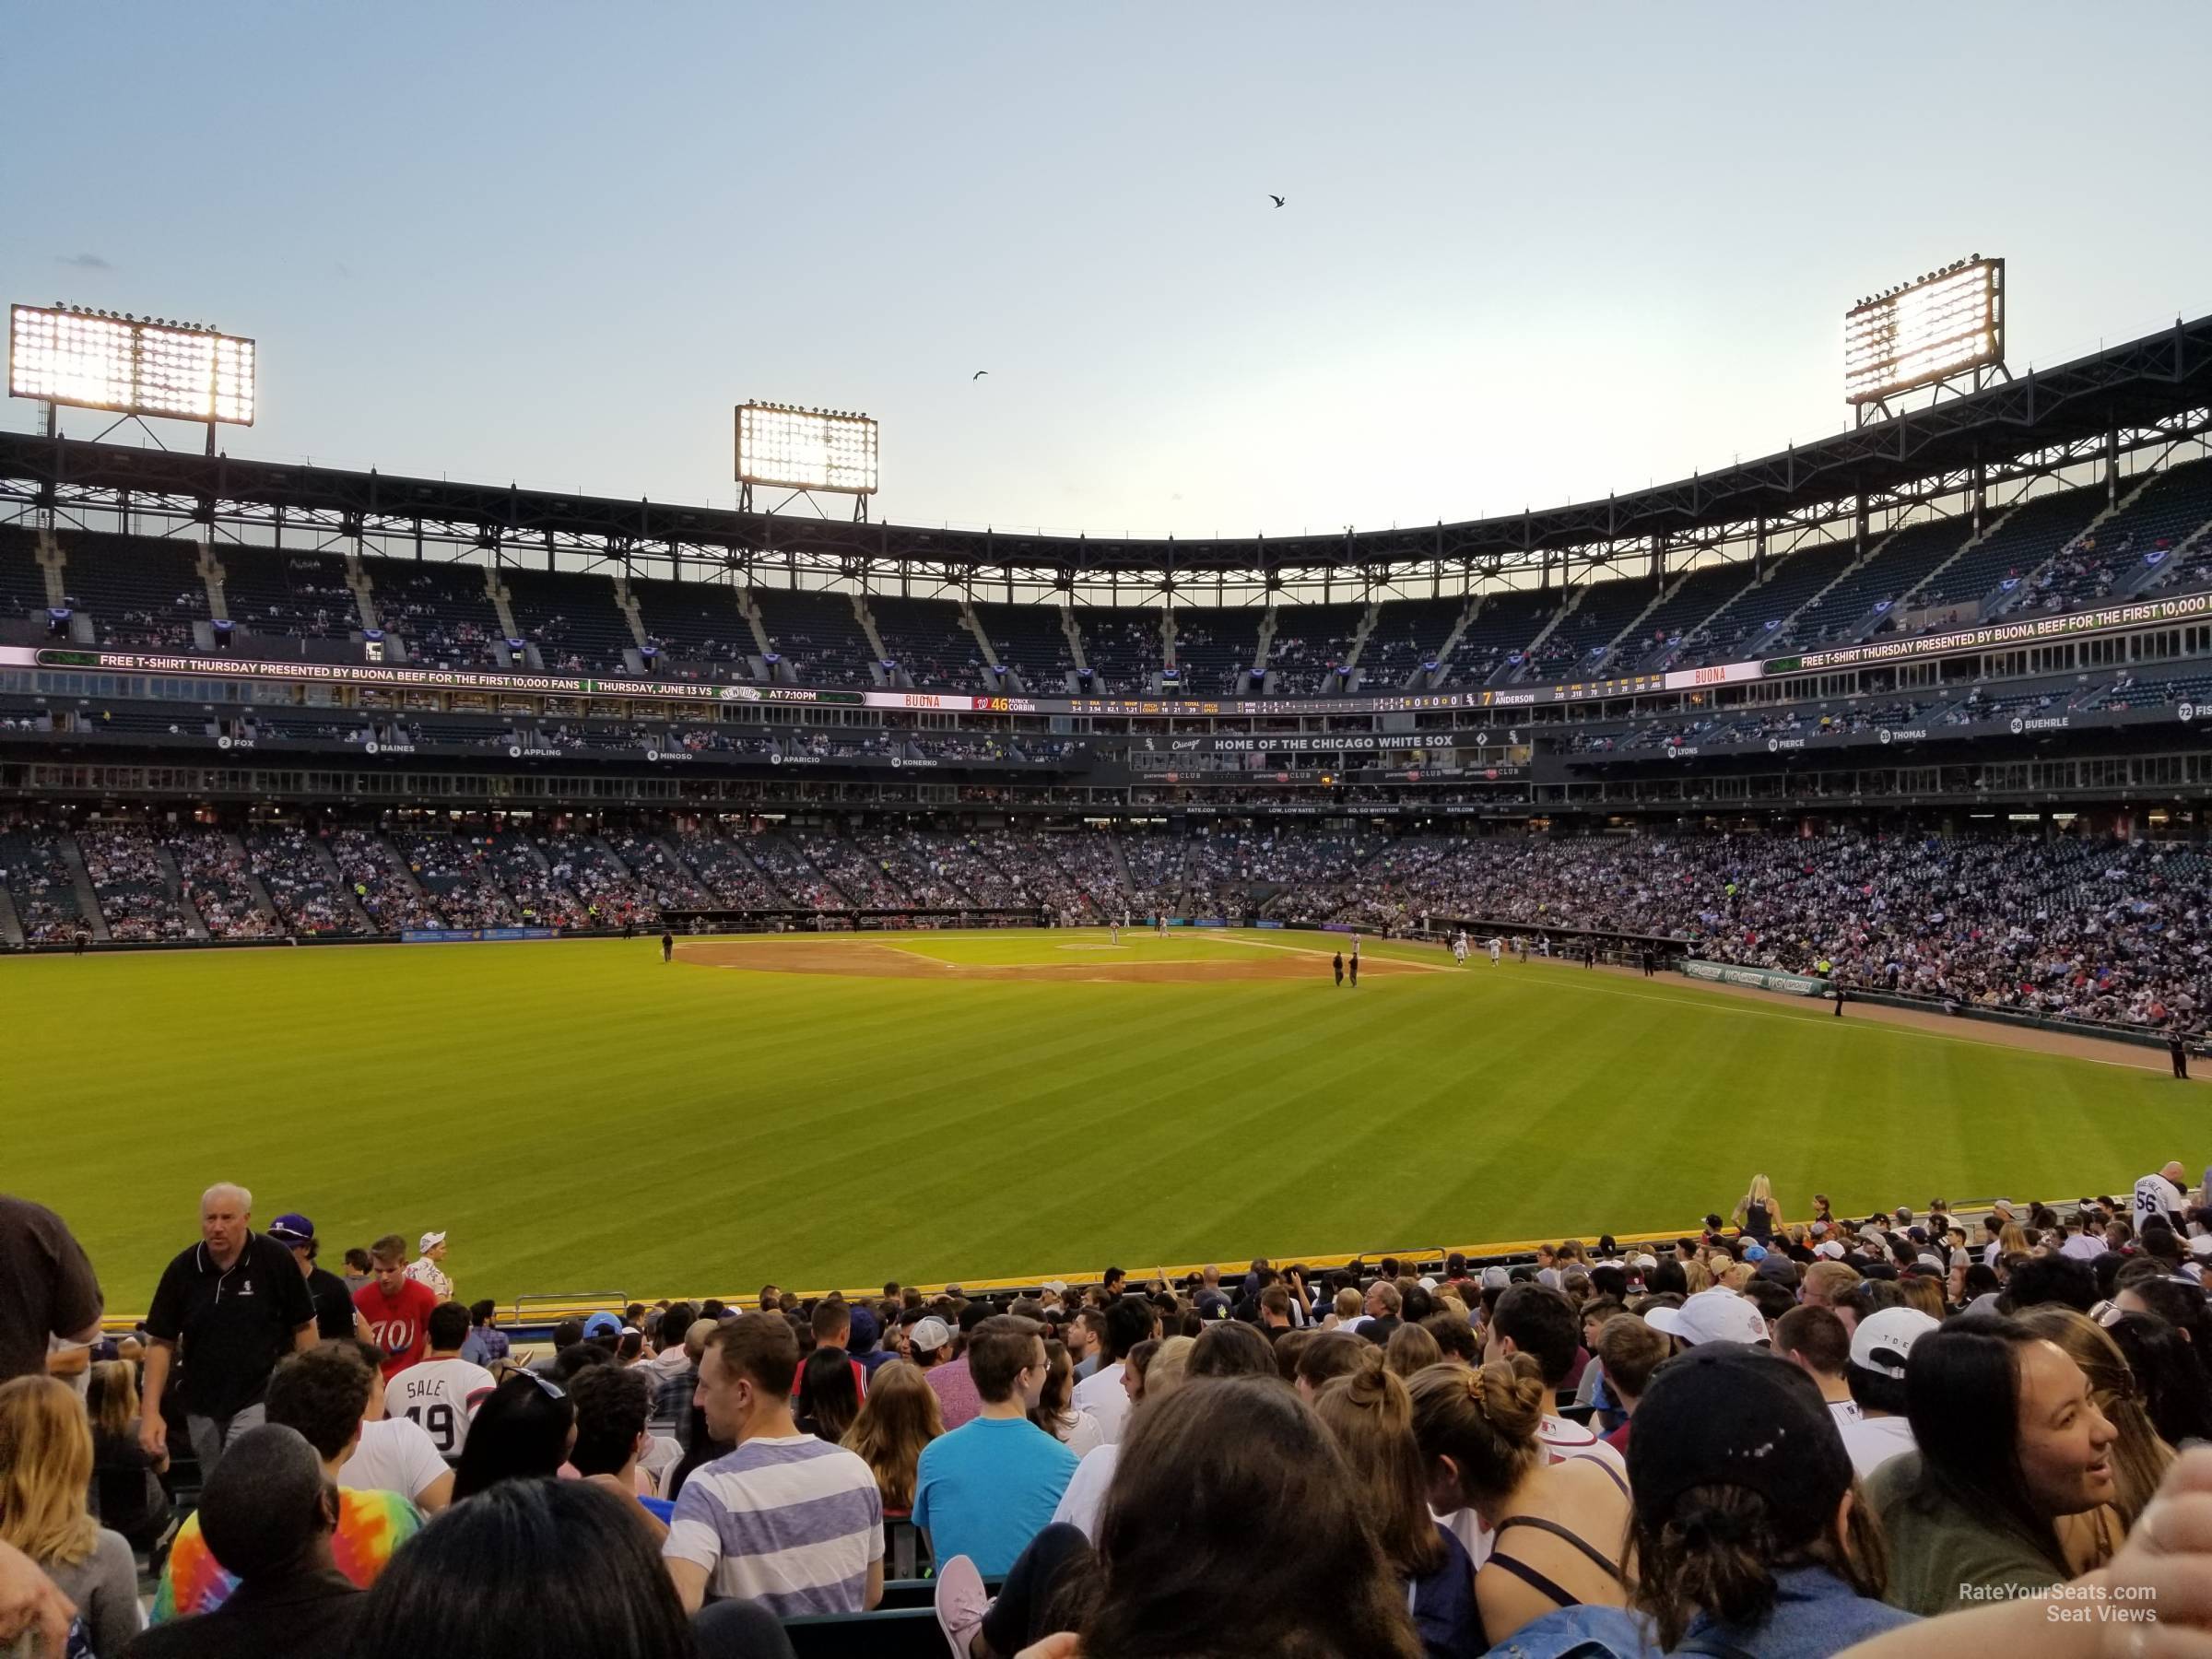 section 161, row 24 seat view  - guaranteed rate field